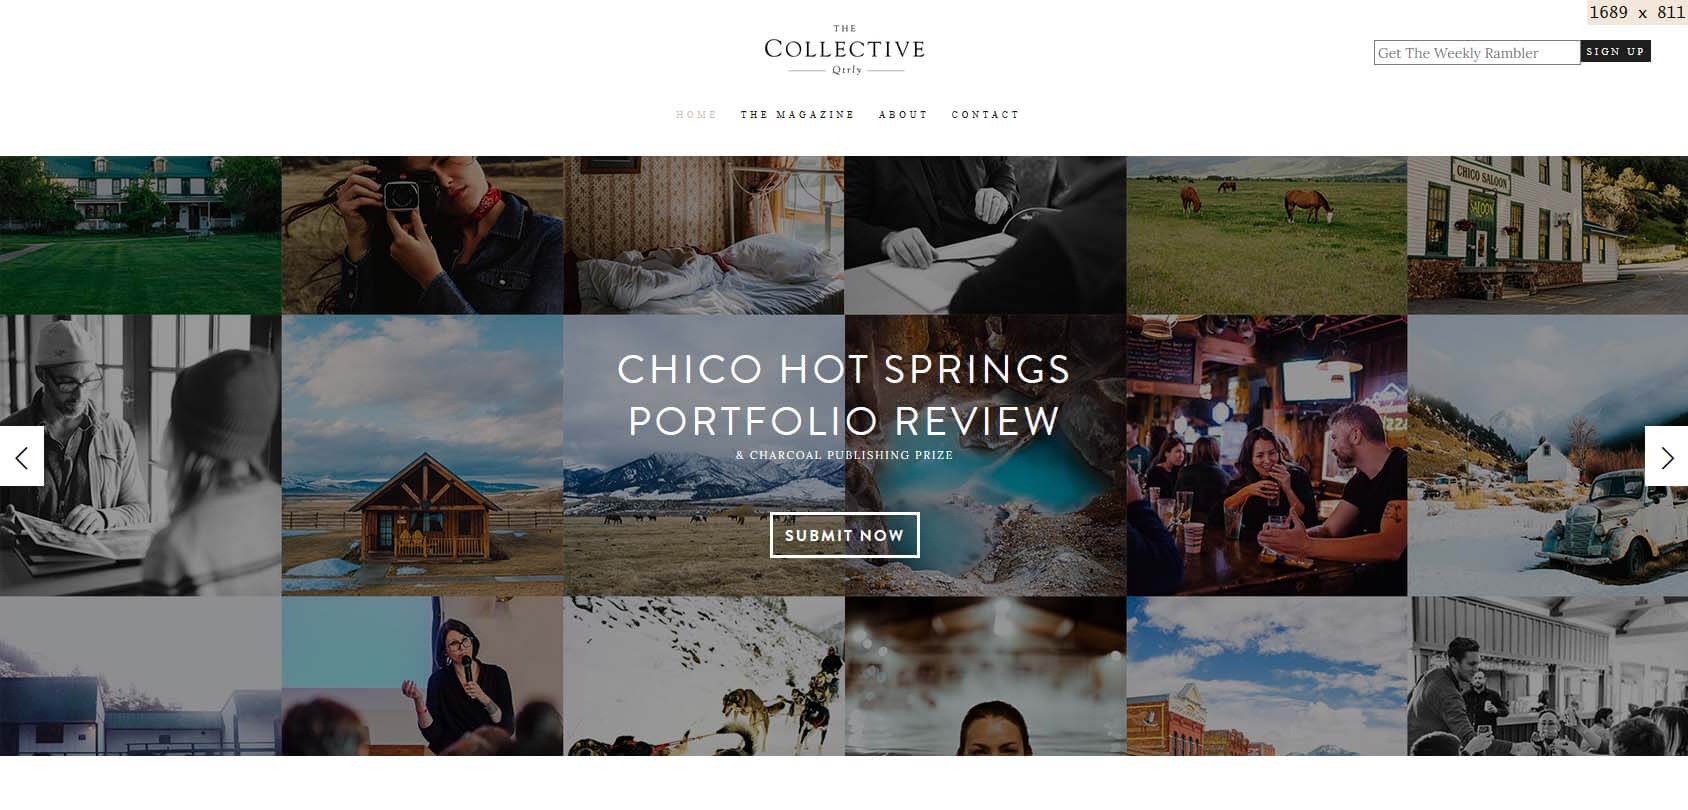 The Collective Quarterly Homepage